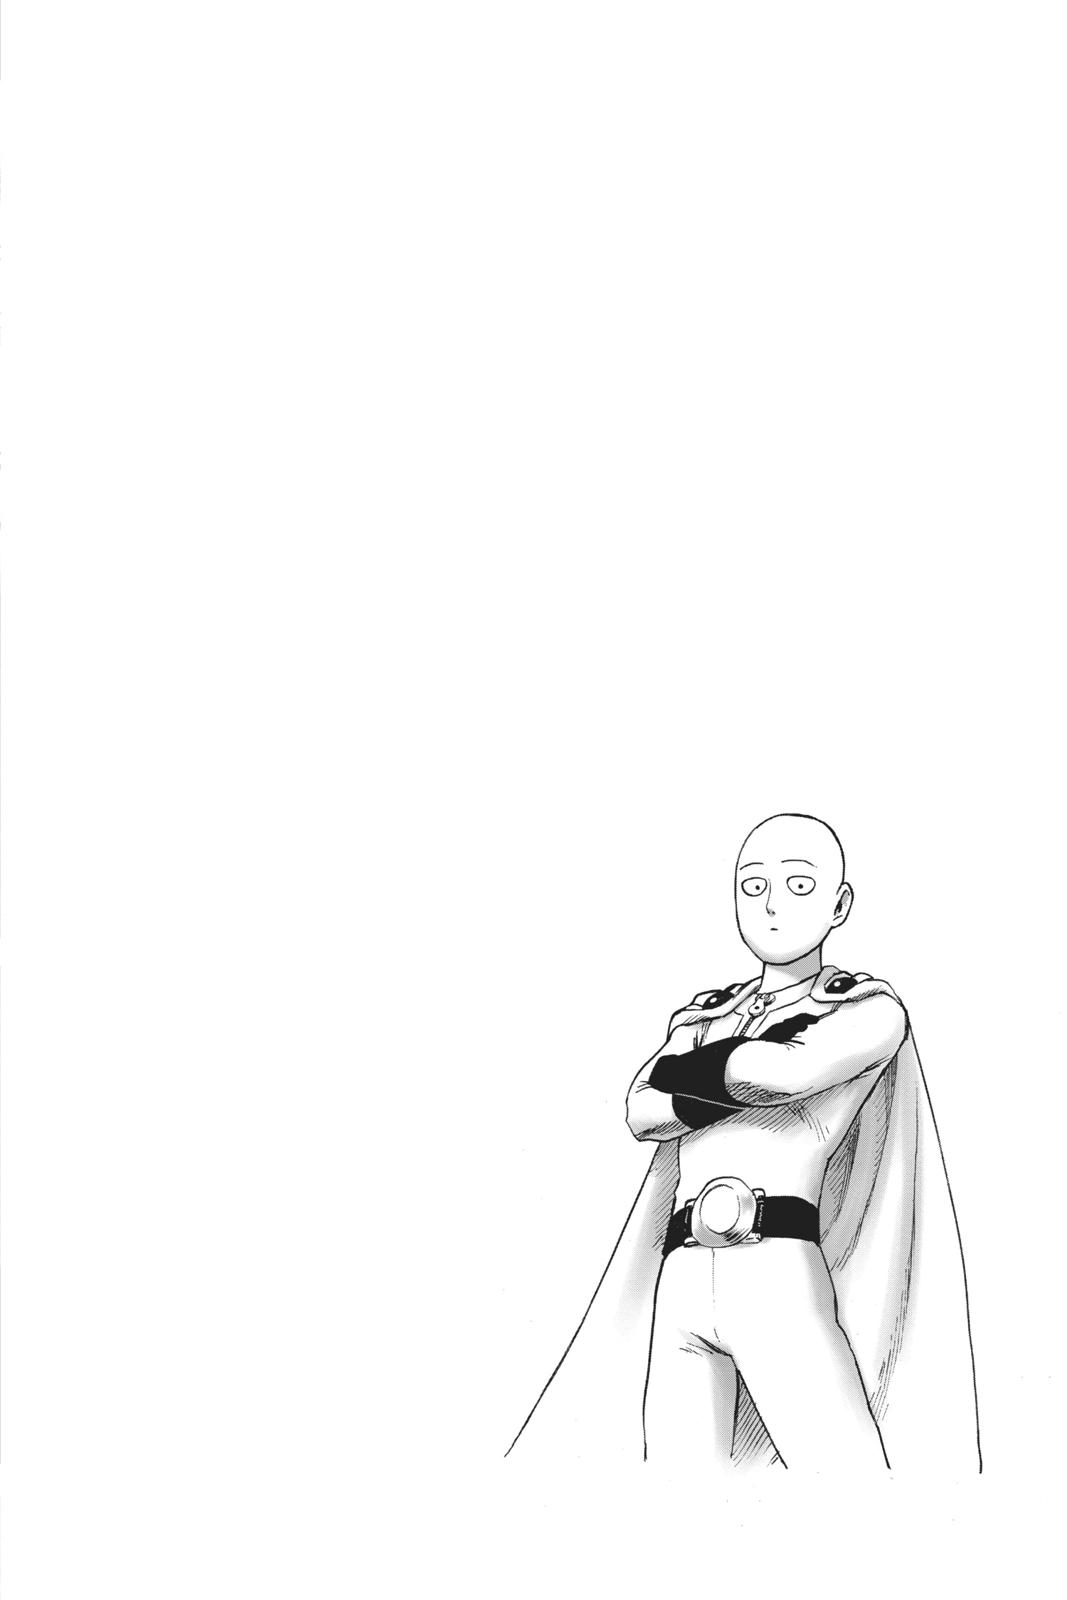 One-Punch Man, Punch 97 image 38